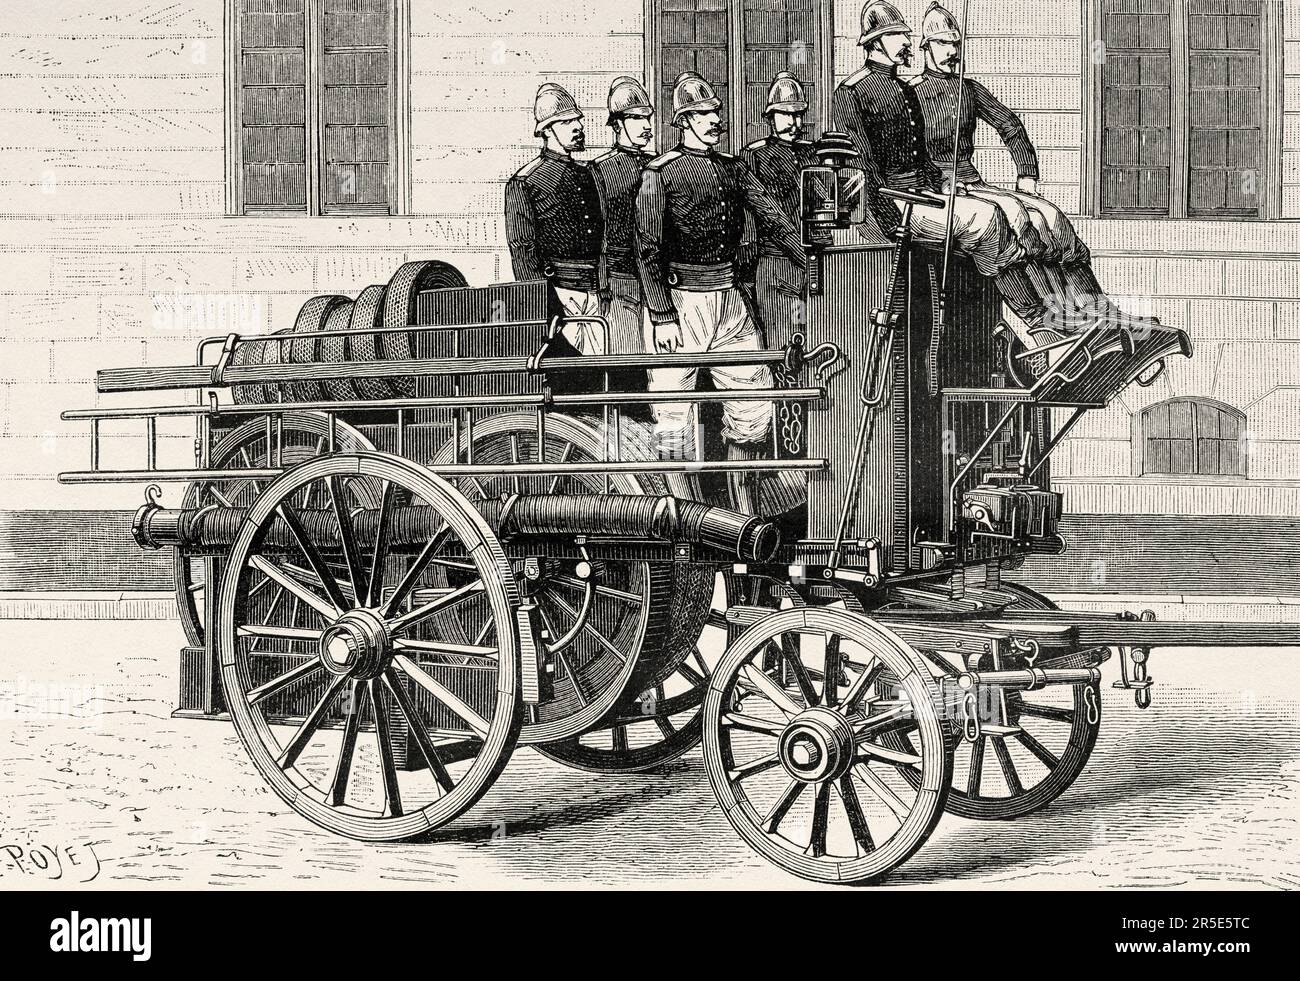 Fire pump trolley of the Paris fire brigade, France. Old 19th century engraving from La Nature 1887 Stock Photo